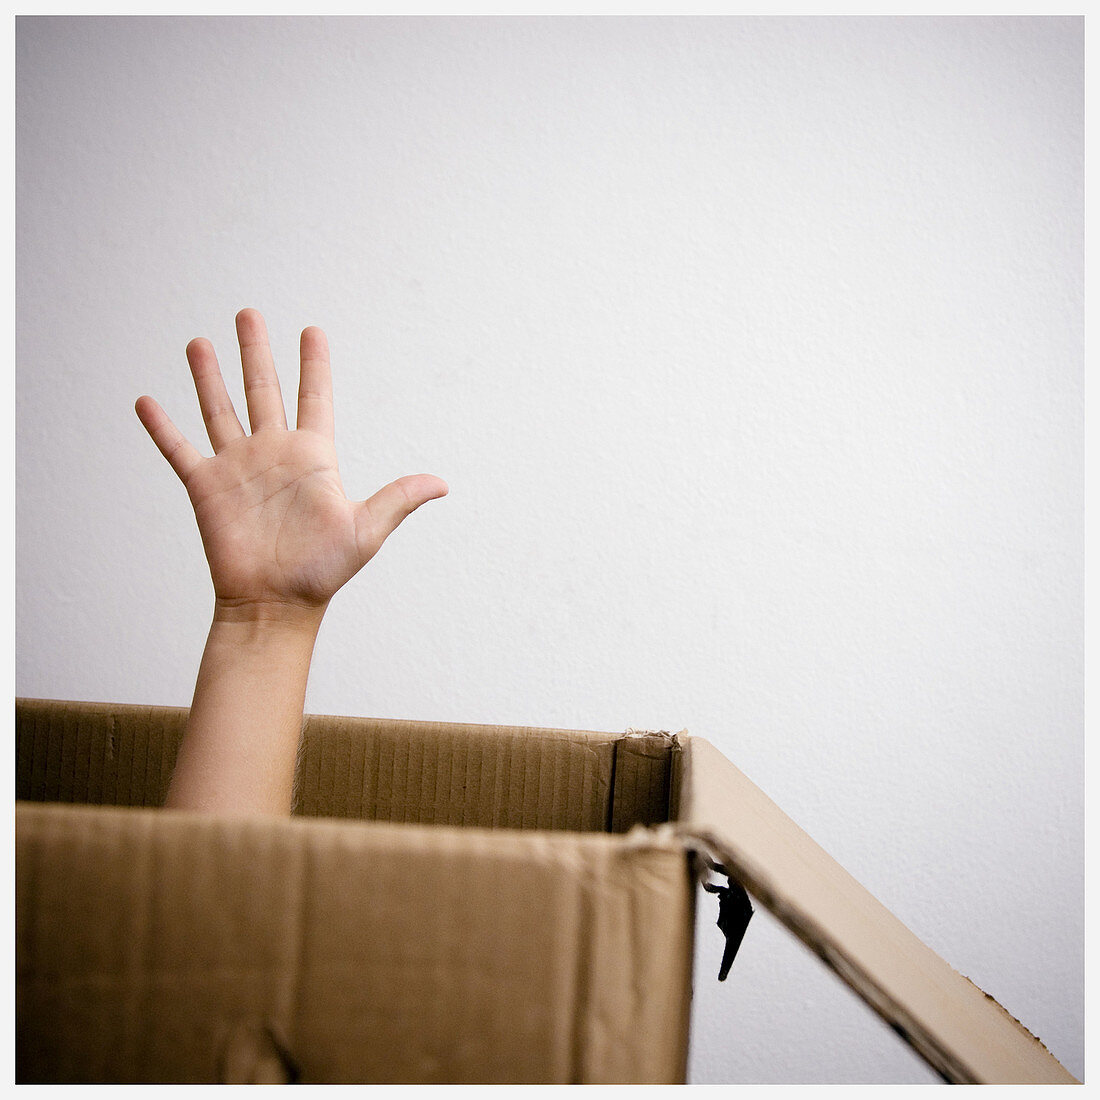  Attracting attention, Box, Boxes, Calling for help, Cardboard, Caught, Child, Children, Color, Colour, Contemporary, Gesture, Gestures, Gesturing, Hand, Hands, Human, Indoor, Indoors, Inside, Interior, Kid, Kids, One, One person, Open, Open hand, Open ha